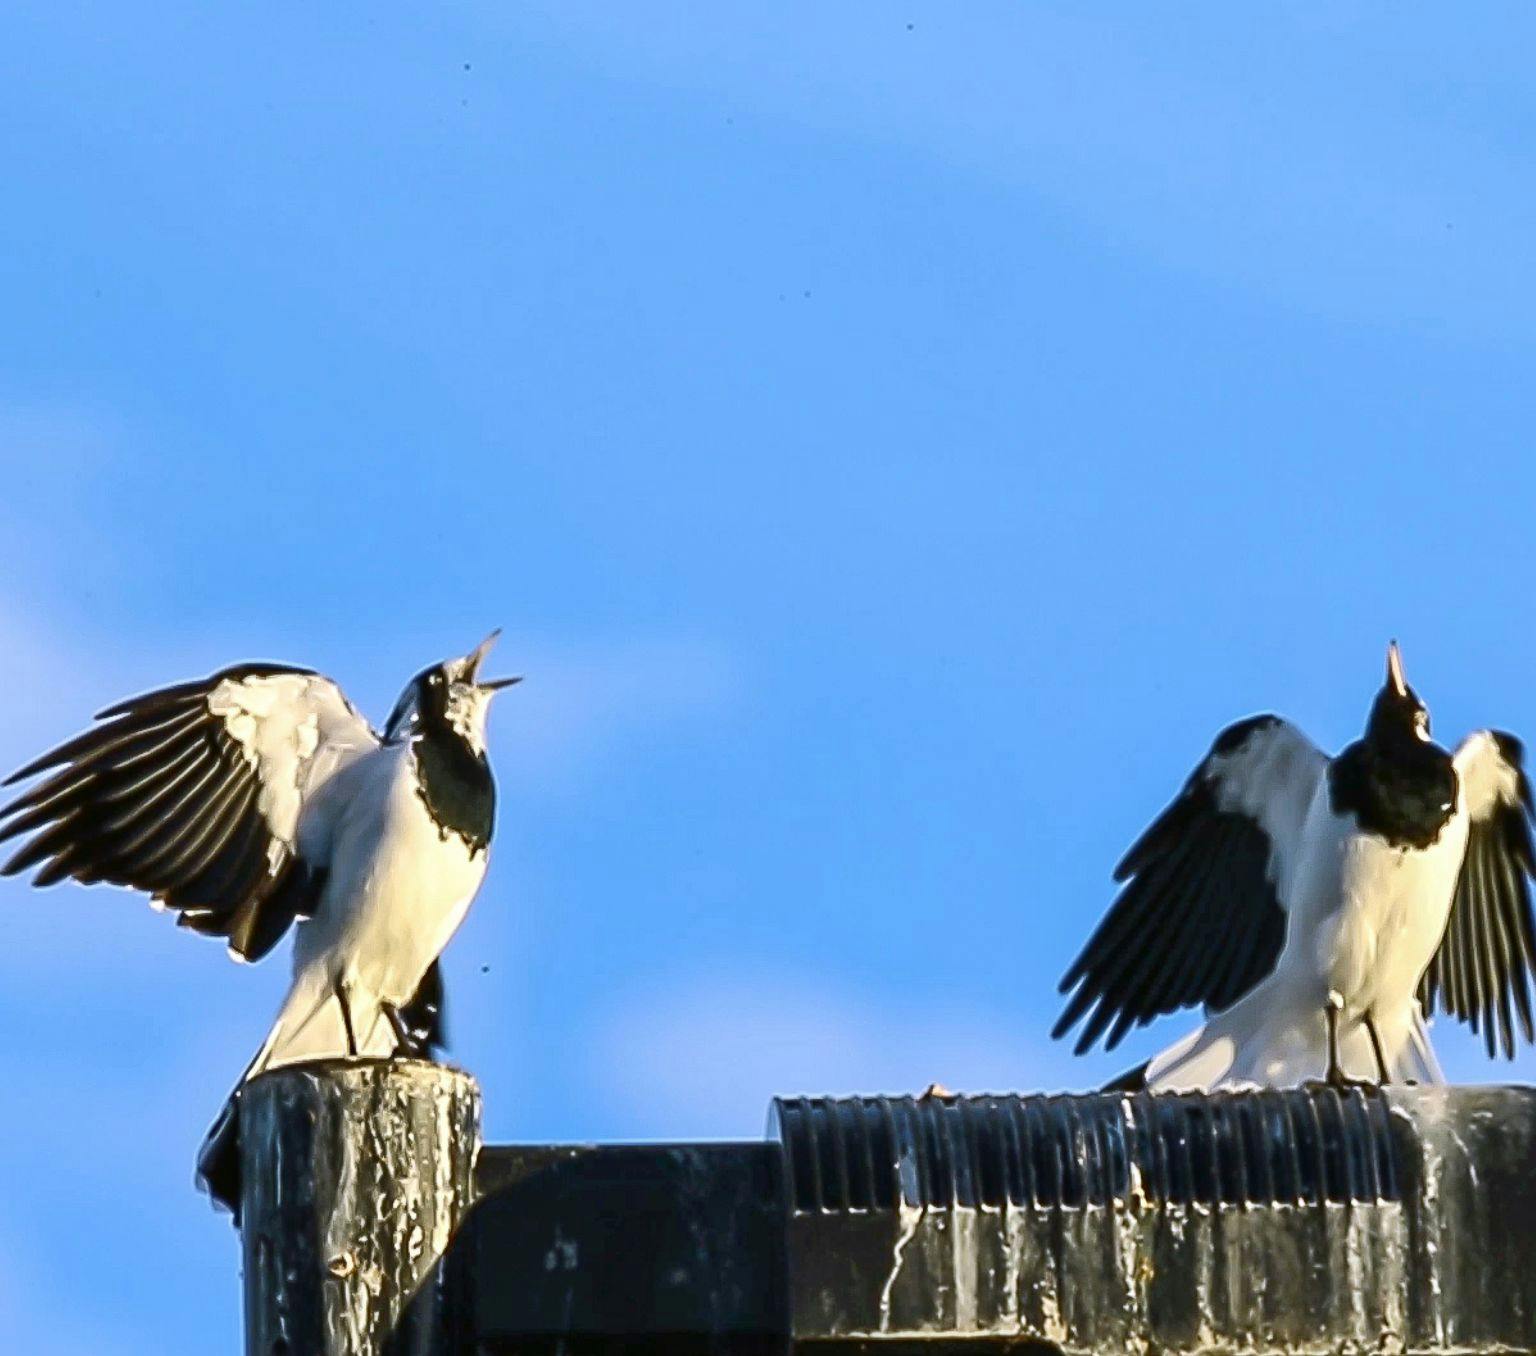 Two magpie-larks sitting on a roof performing a duet call